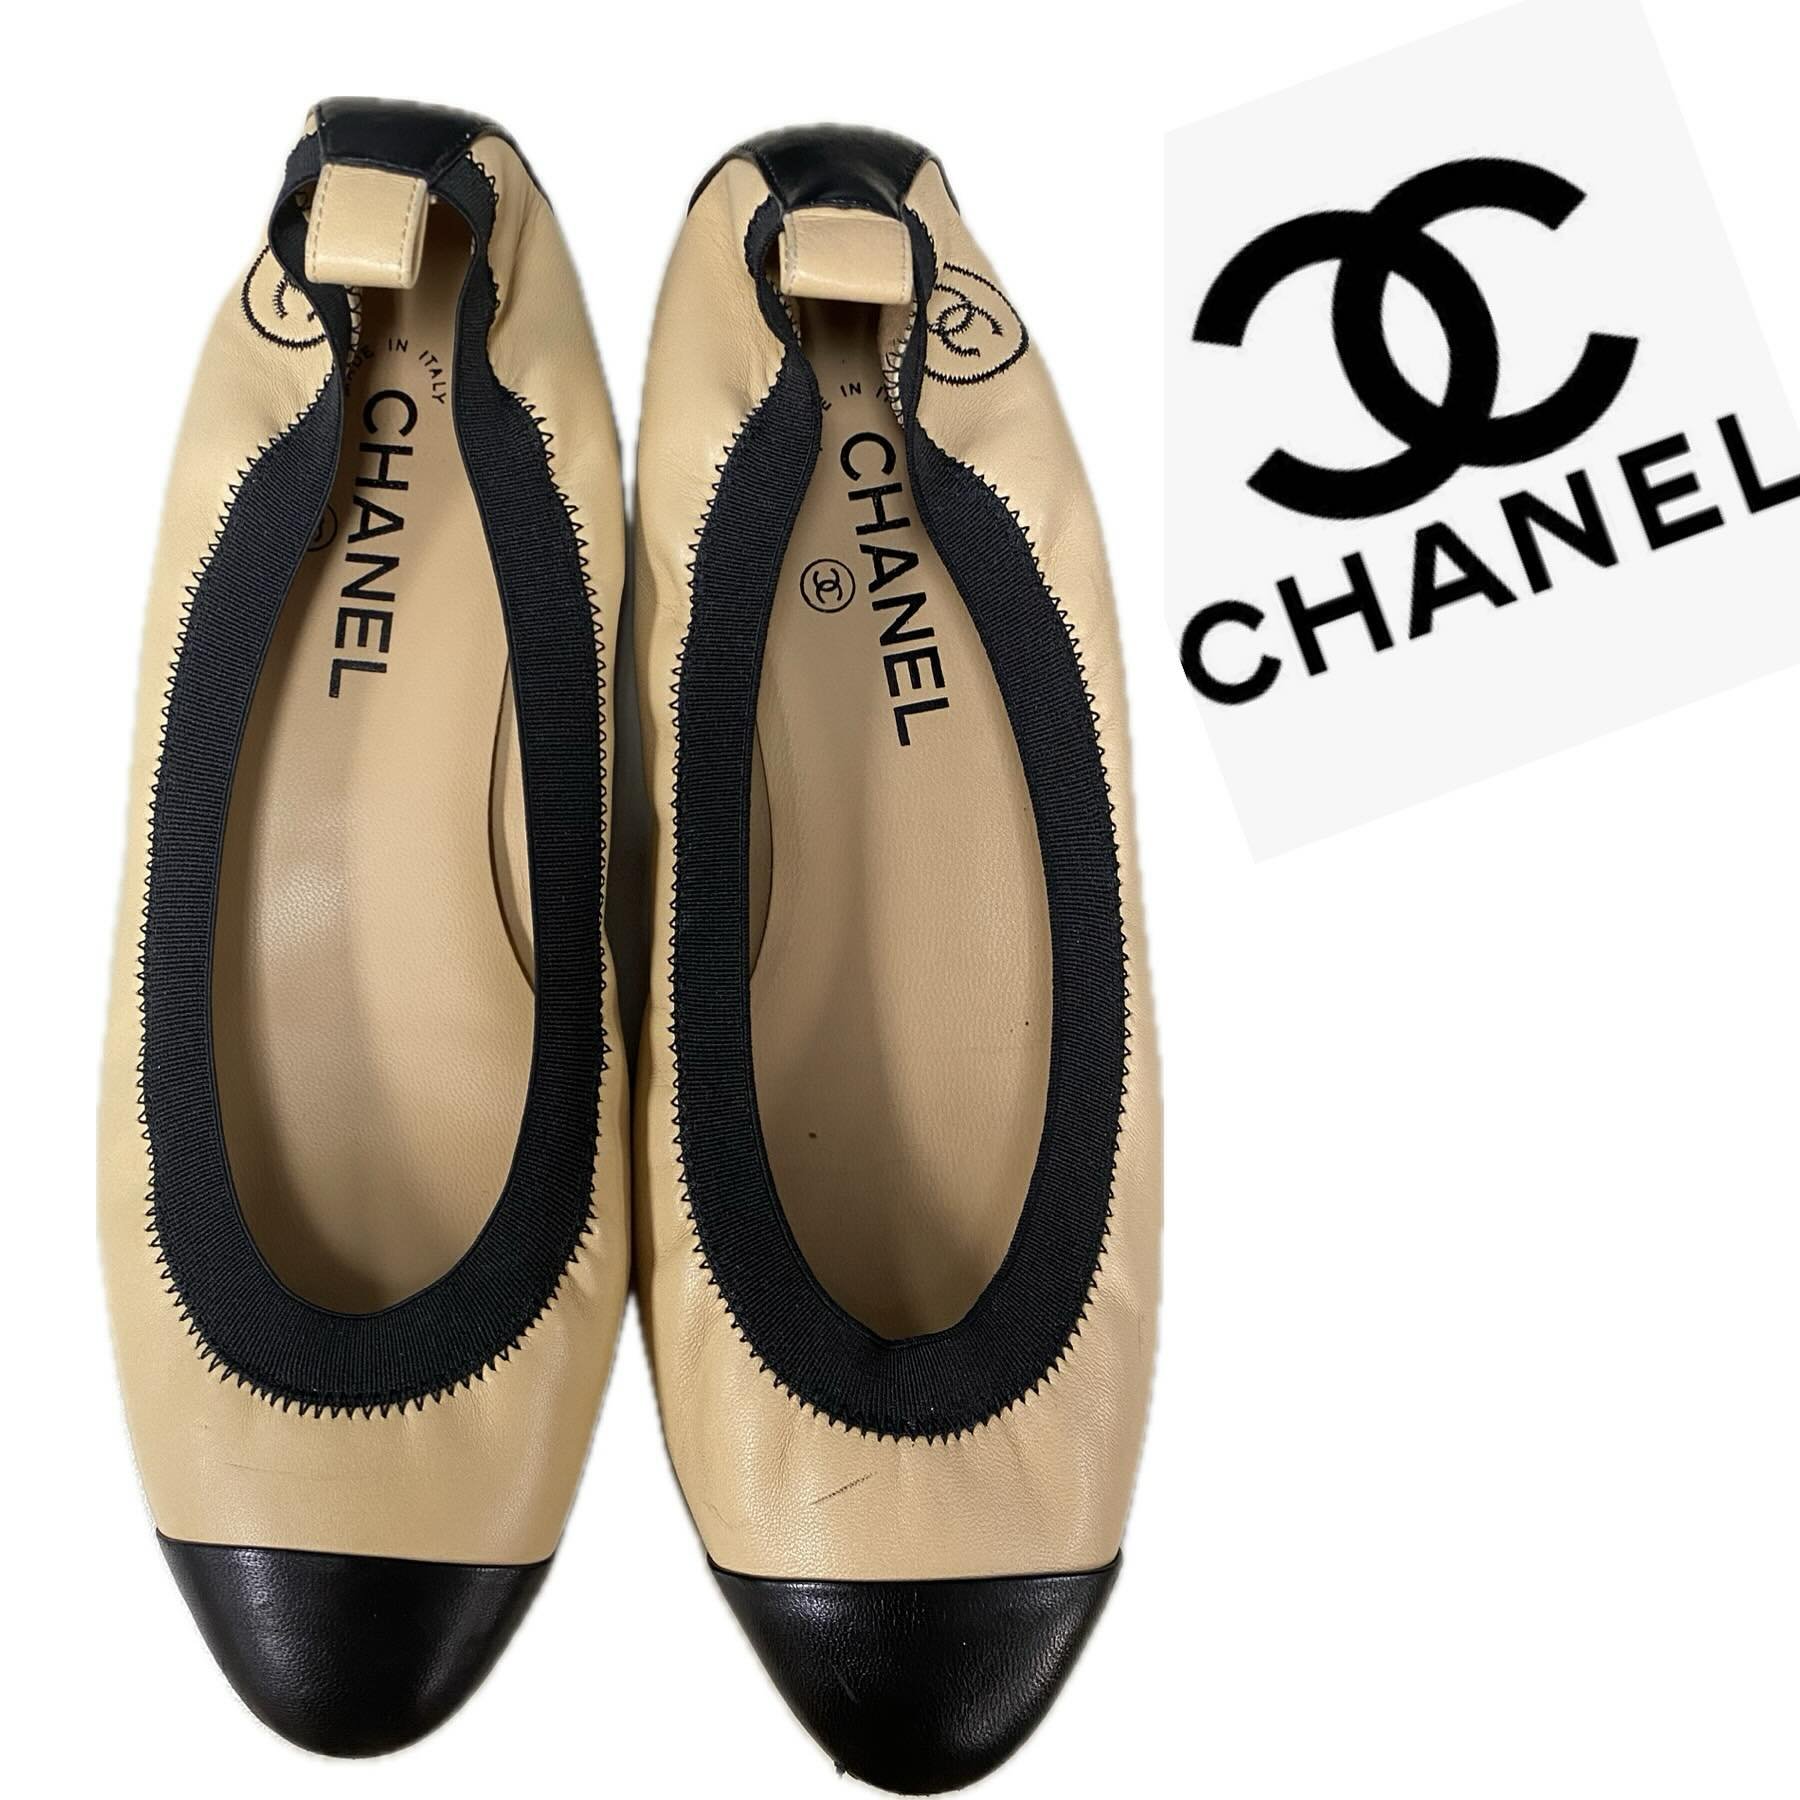 Chanel Flats Size 40. #chanel #chanelflats #redeuxapparel #consignmentboutique #shoplocal